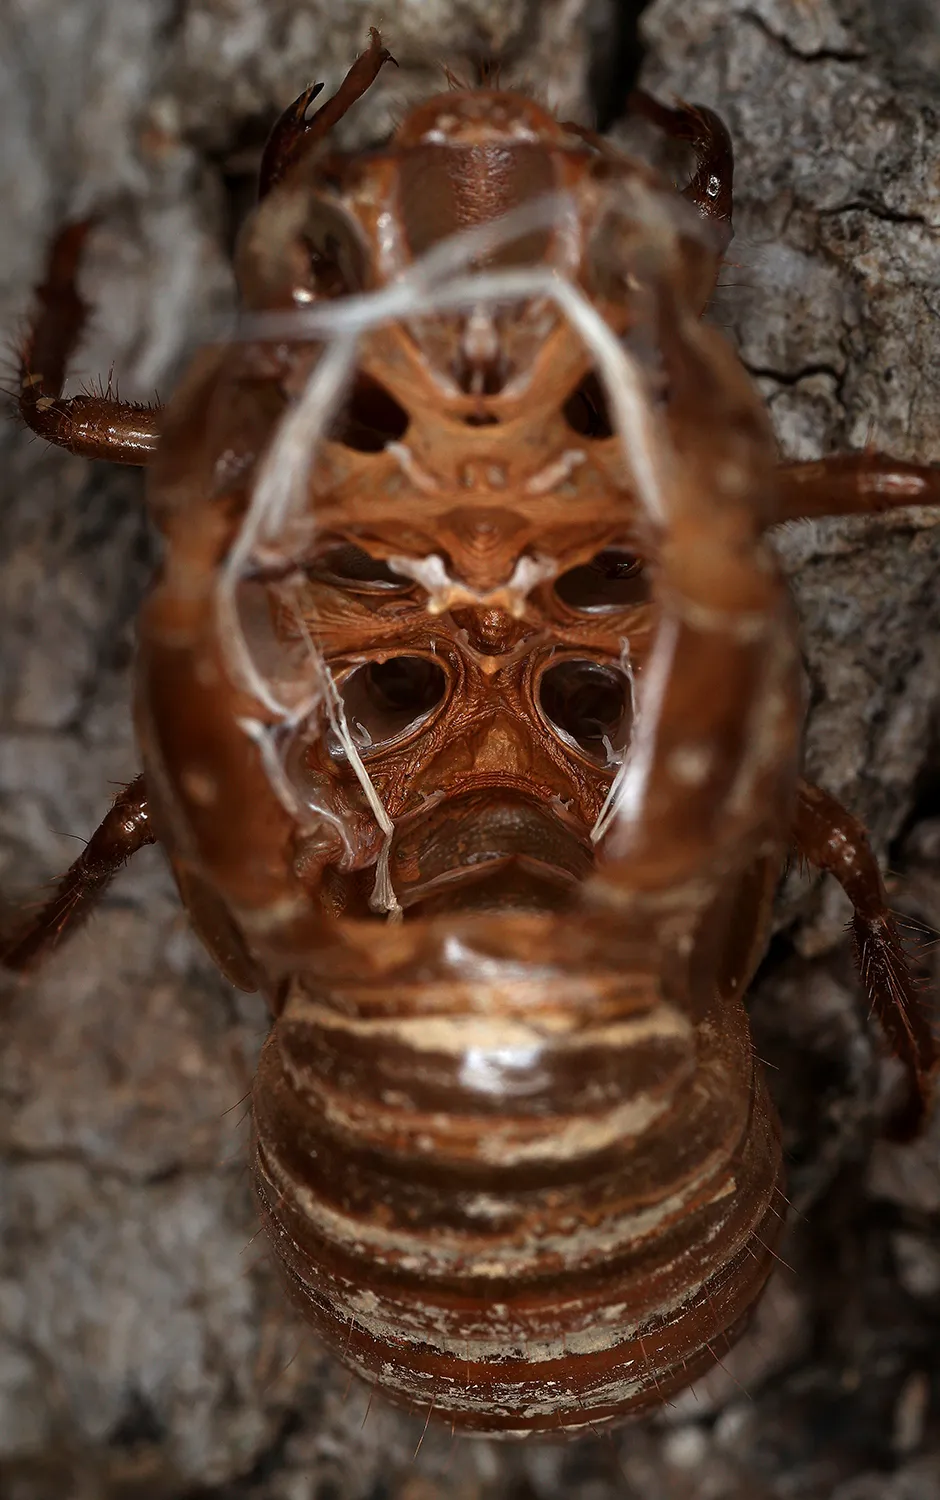 TAKOMA PARK, MD - MAY 10: The empty shell of a periodical cicada nymph clings to a tree after the adult insect molted on May 10, 2021 in Takoma Park, Maryland. Once soil temperatures reach about 64°F, billions and billions of these periodical cicadas -- members of Brood X -- will emerge in fifteen states and the District of Columbia after living underground for 17 years. The cicadas will emerge, molt, mate, lay eggs and die within a matter of weeks. (Photo by Chip Somodevilla/Getty Images)